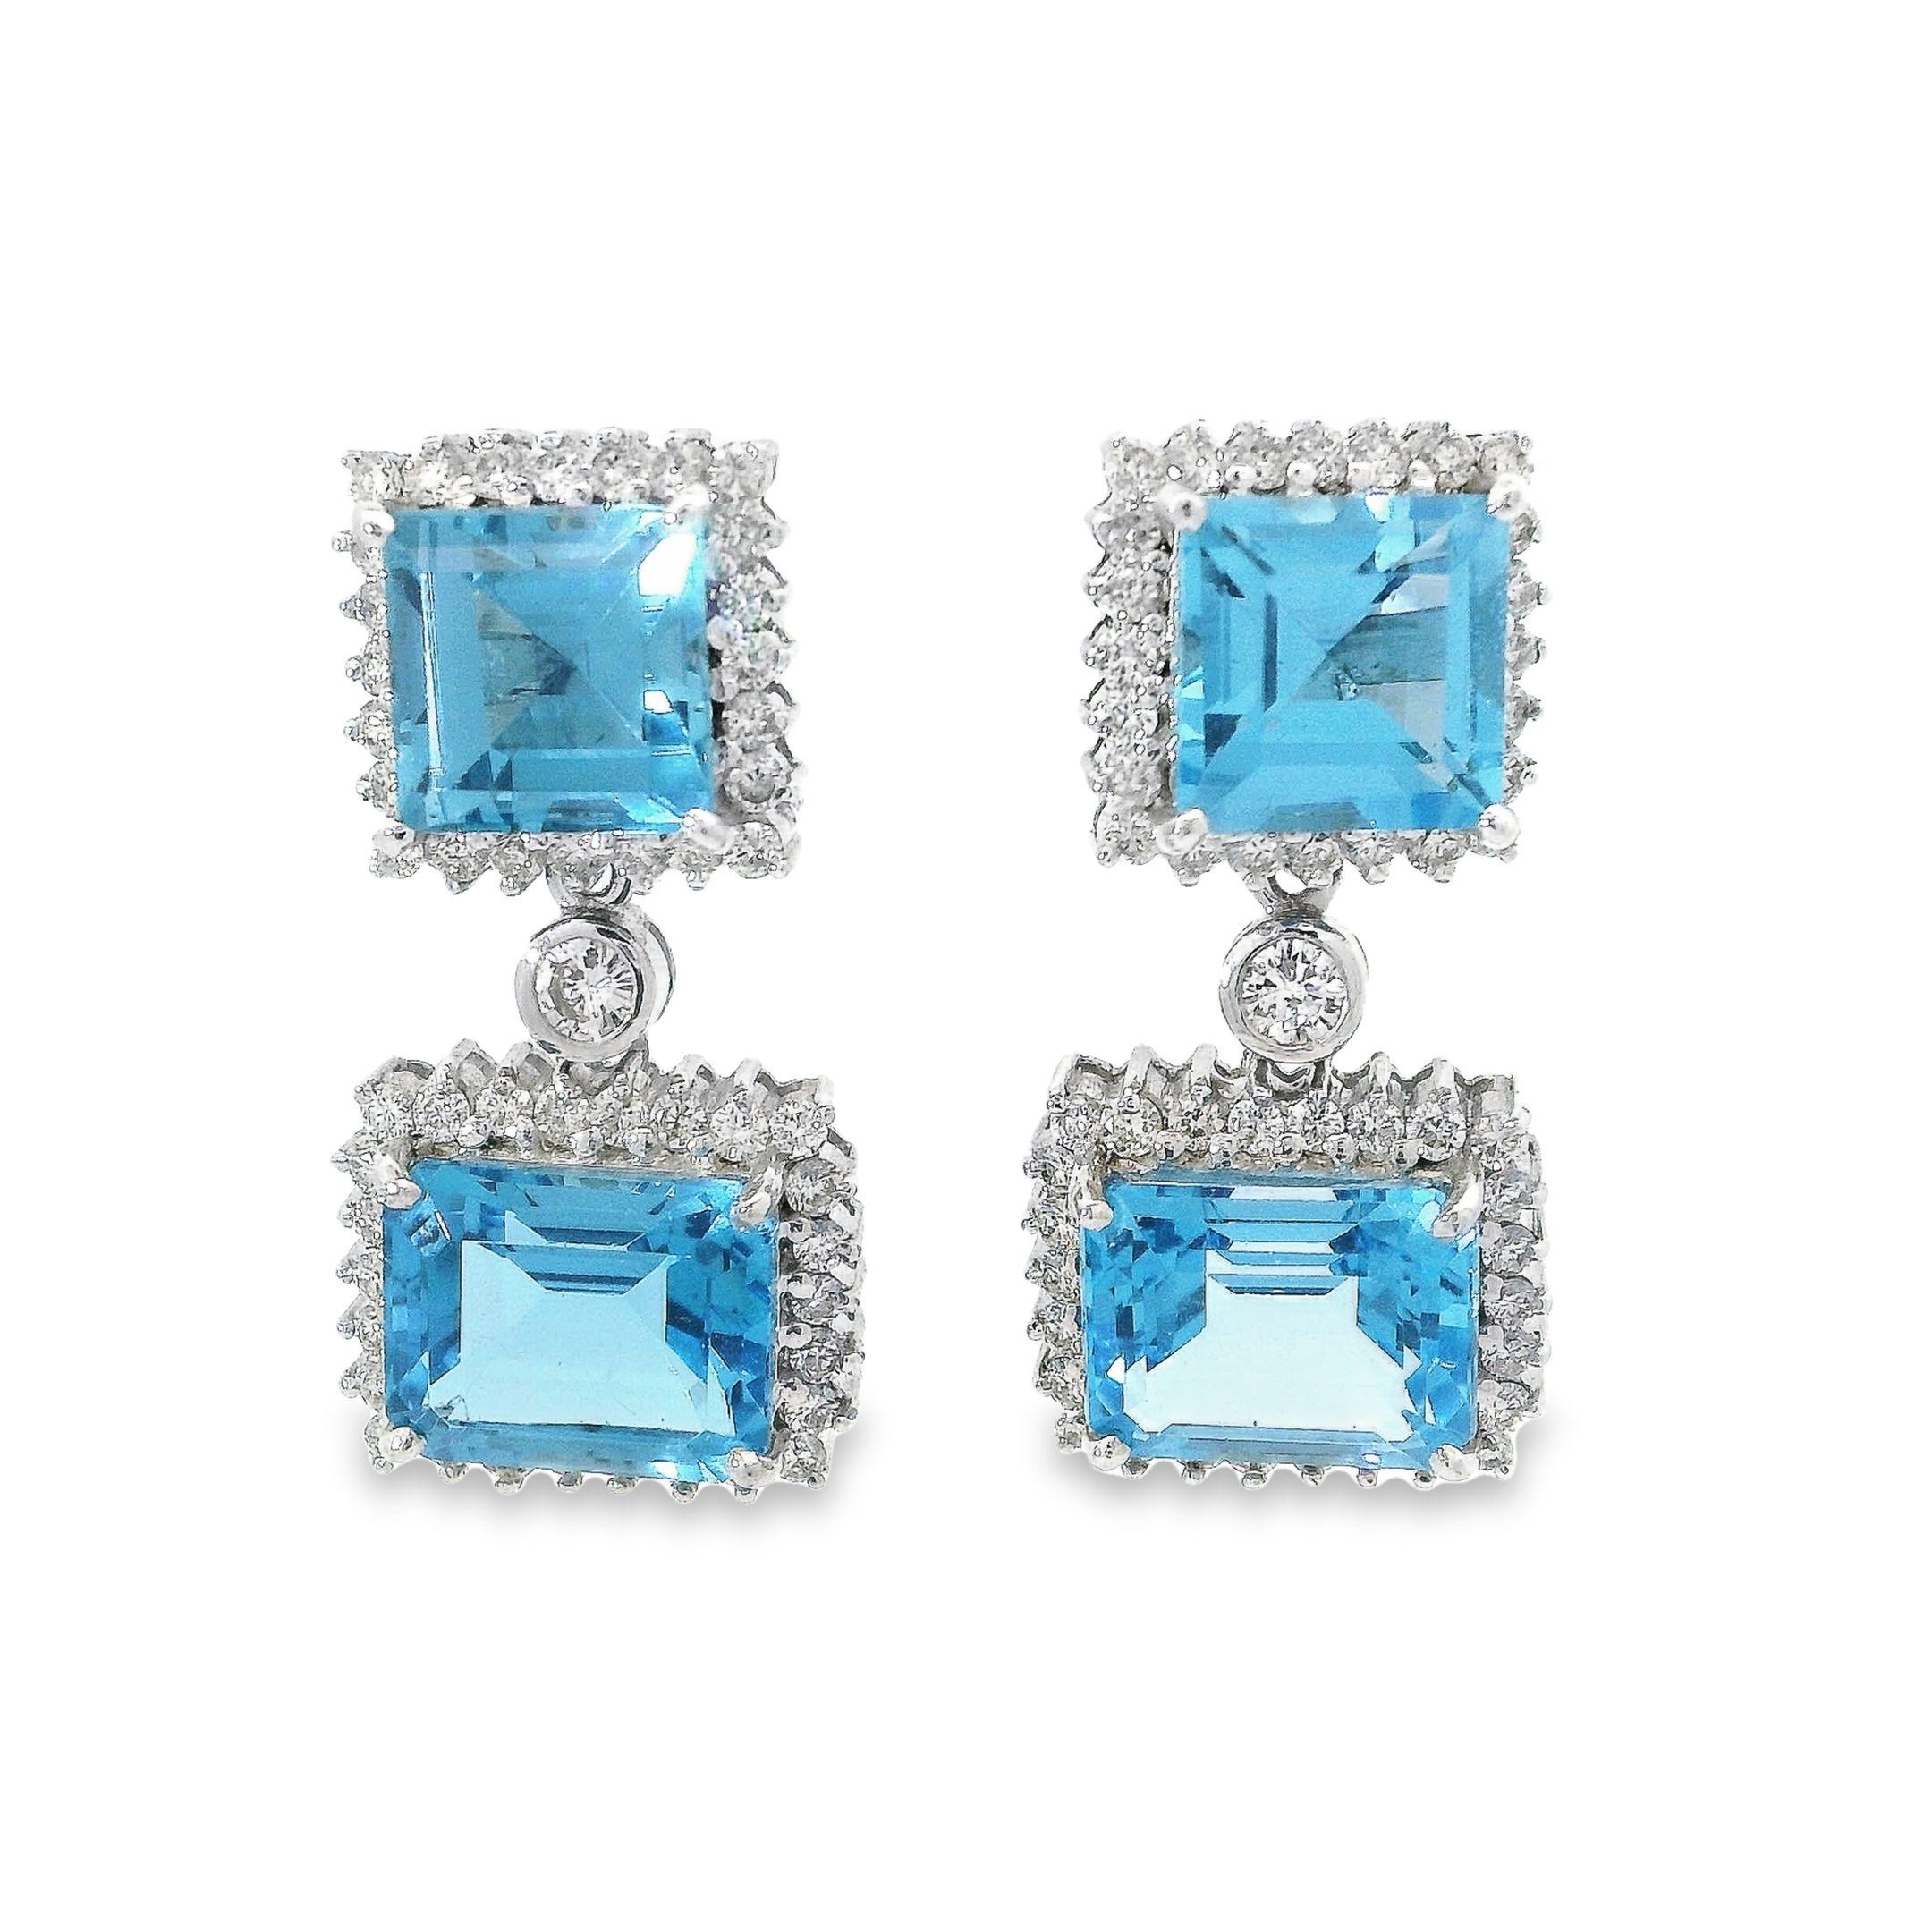 Embrace versatility and elegance with these captivating blue topaz earrings that can be worn as rectangular studs by removing the hanging blue topaz bits. Crafted with meticulous attention to detail, these earrings offer a stunning dual design,